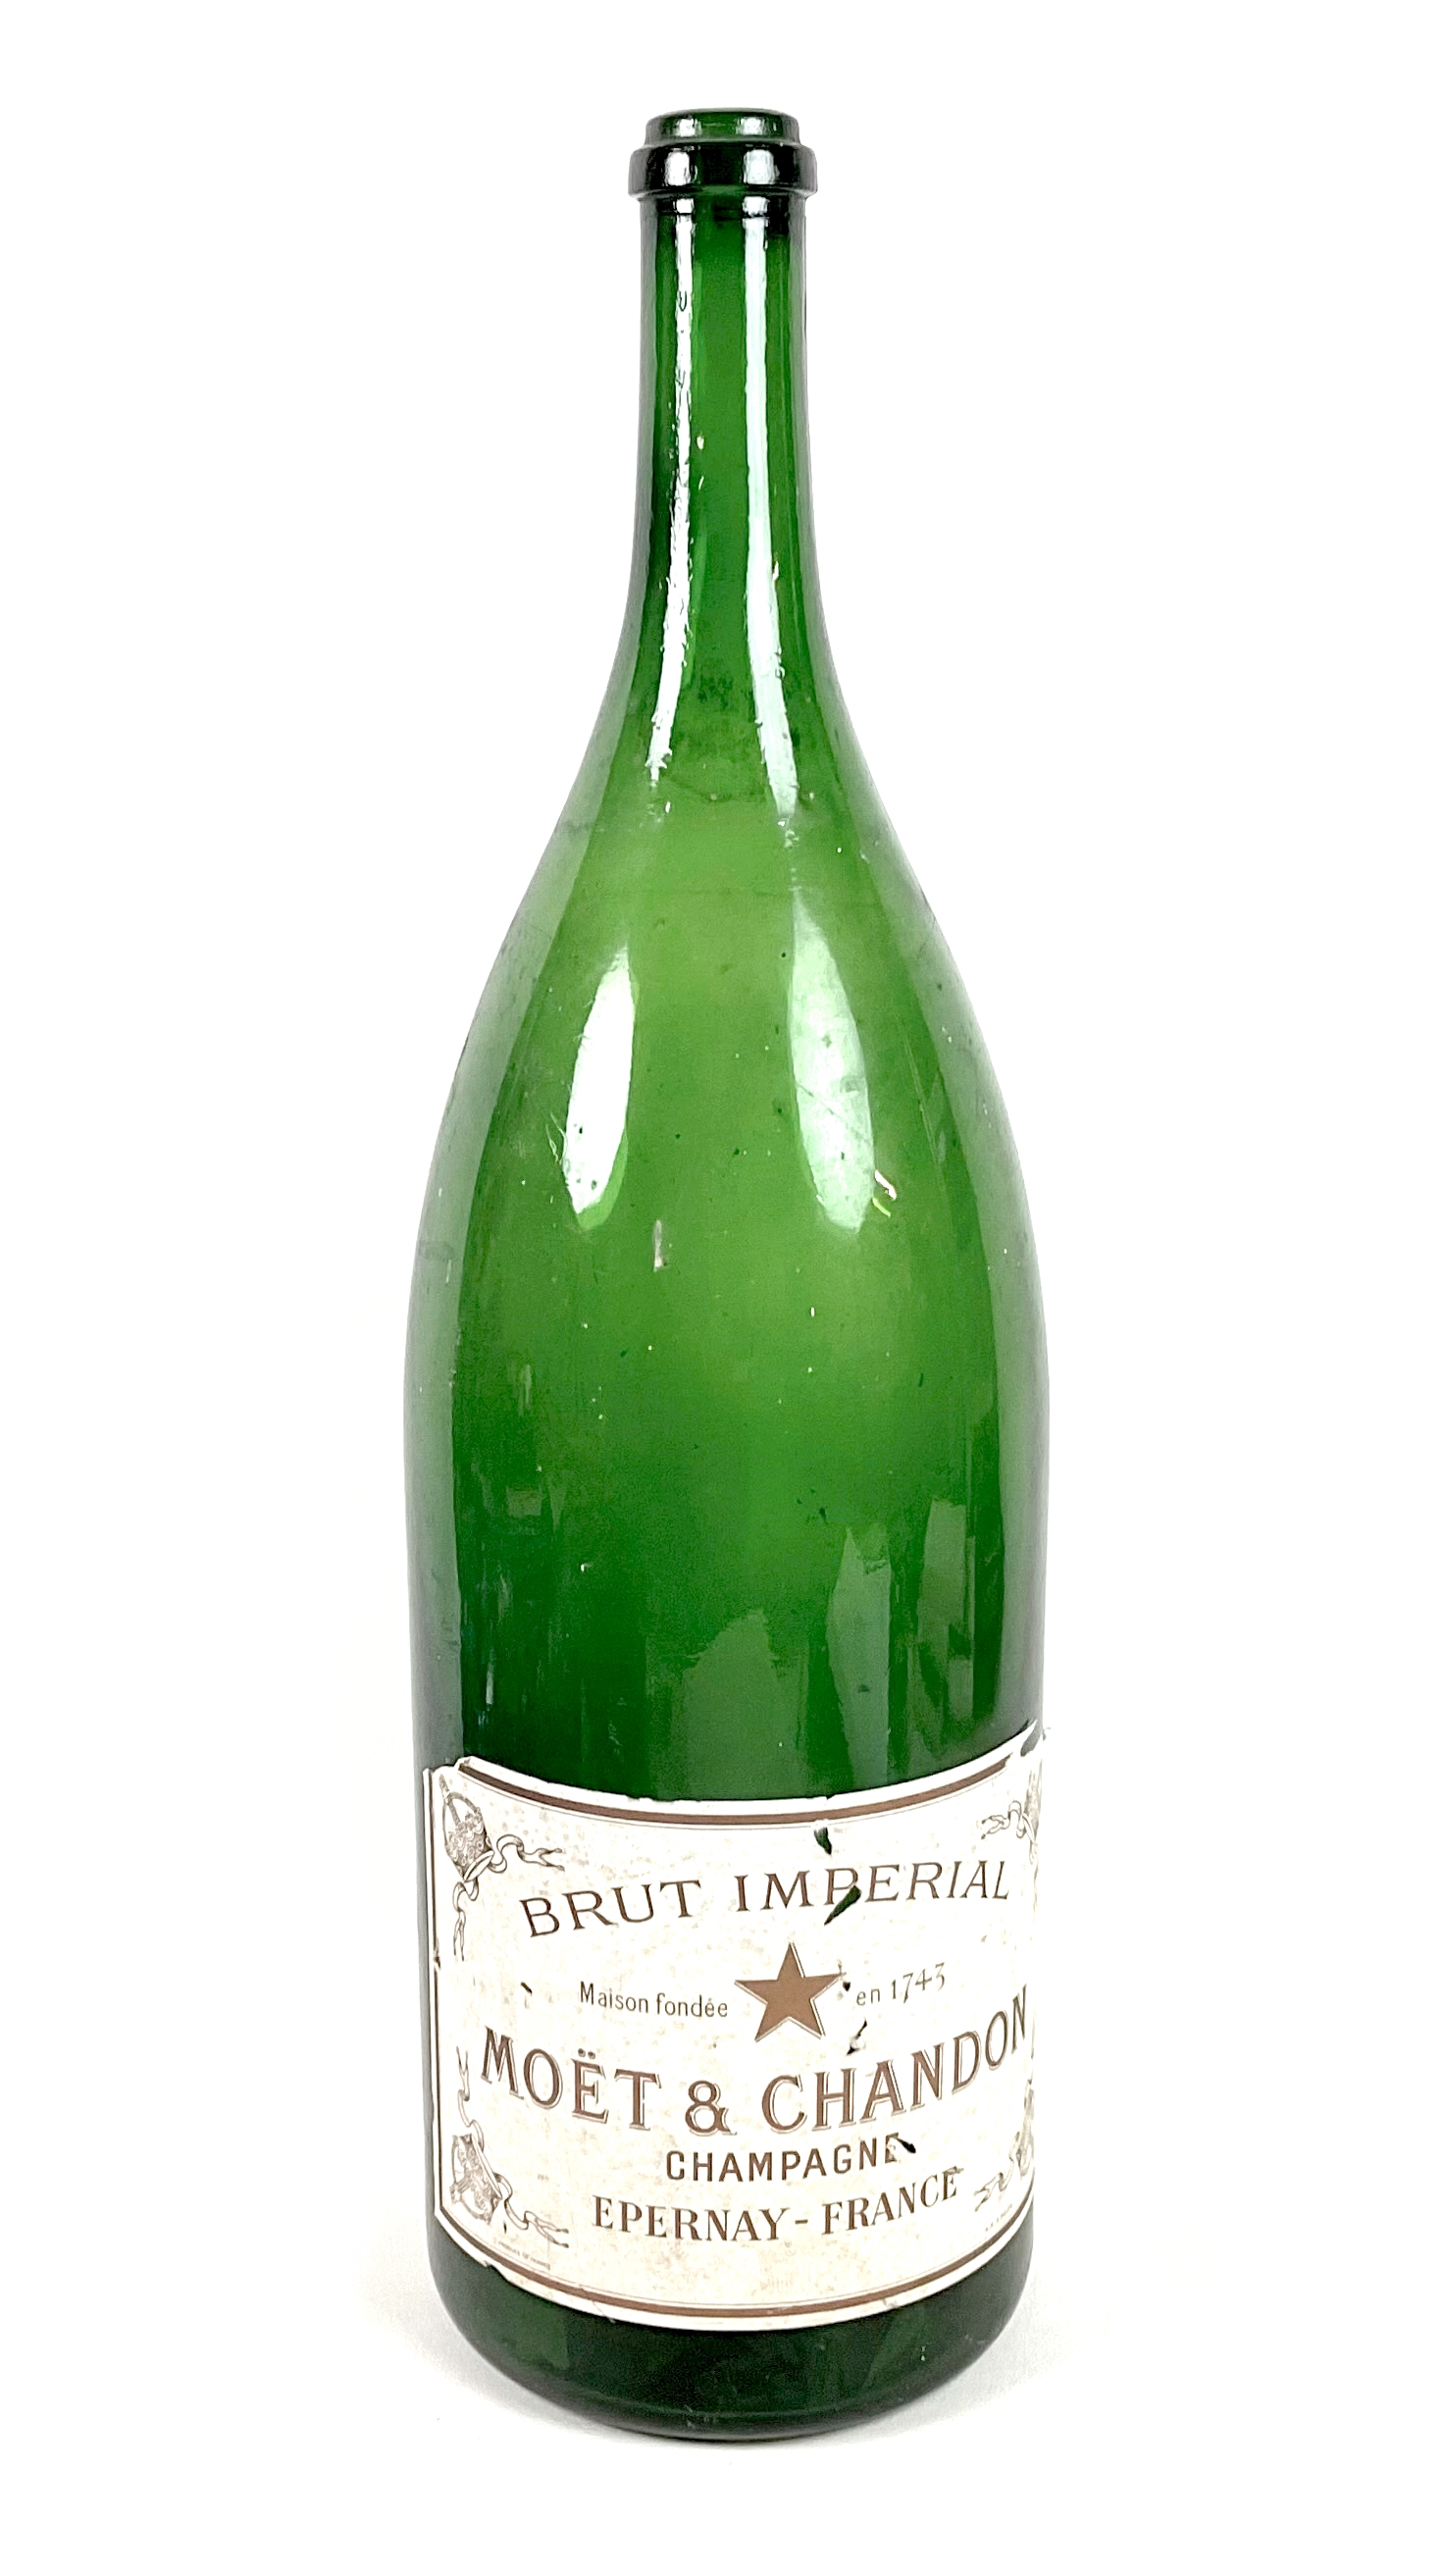 An empty Moet & Chandon Salmanazar or Jeroboam of Brut Imperial Champagne, circa 1960, 18.5 by 64.